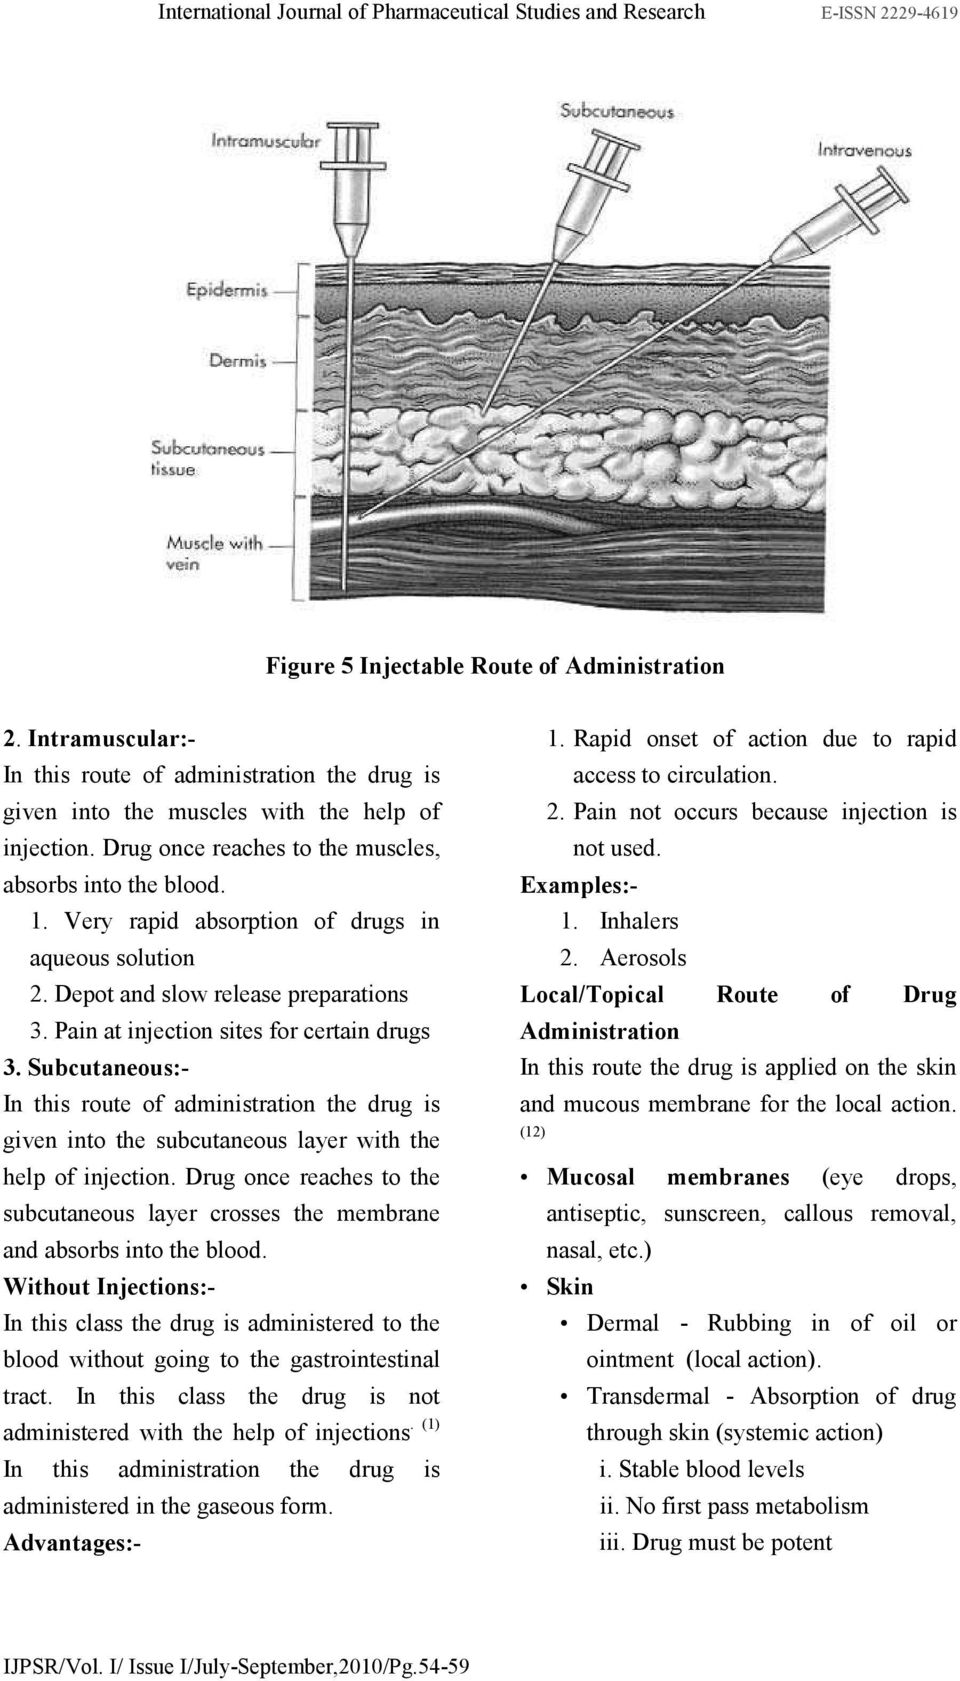 Subcutaneous:- given into the subcutaneous layer with the help of injection. Drug once reaches to the subcutaneous layer crosses the membrane and absorbs into the blood.